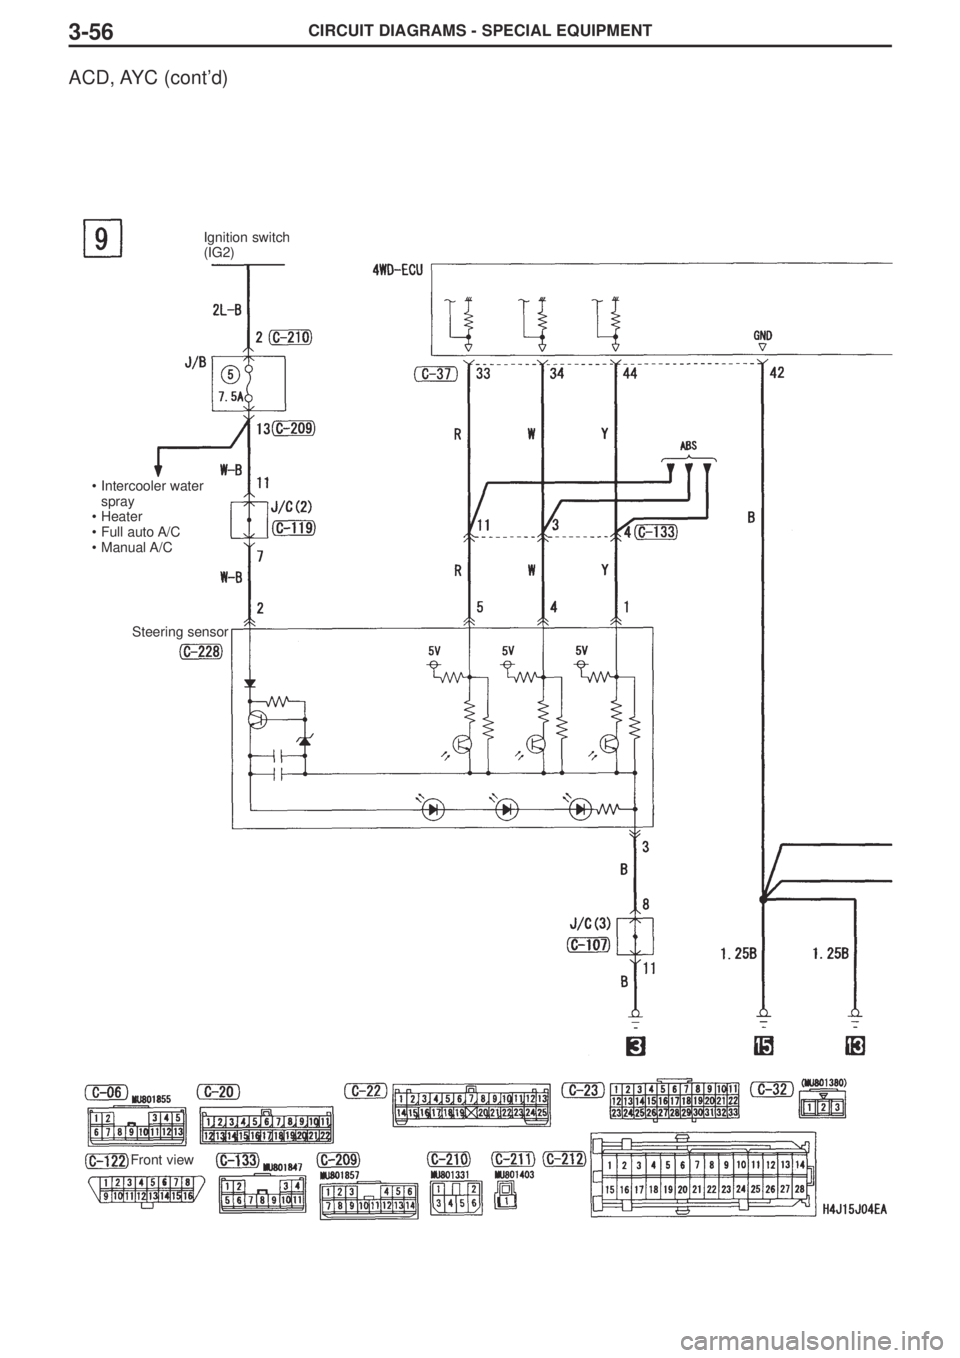 MITSUBISHI LANCER EVOLUTION VIII 2004  Workshop Manual CIRCUIT DIAGRAMS - SPECIAL EQUIPMENT3-56
ACD, AYC  (cont’d)
Ignition switch
(IG2)
•Intercooler water 
spray
•Heater
•Full auto A/C
•Manual A/C
Steering sensor
Front view 